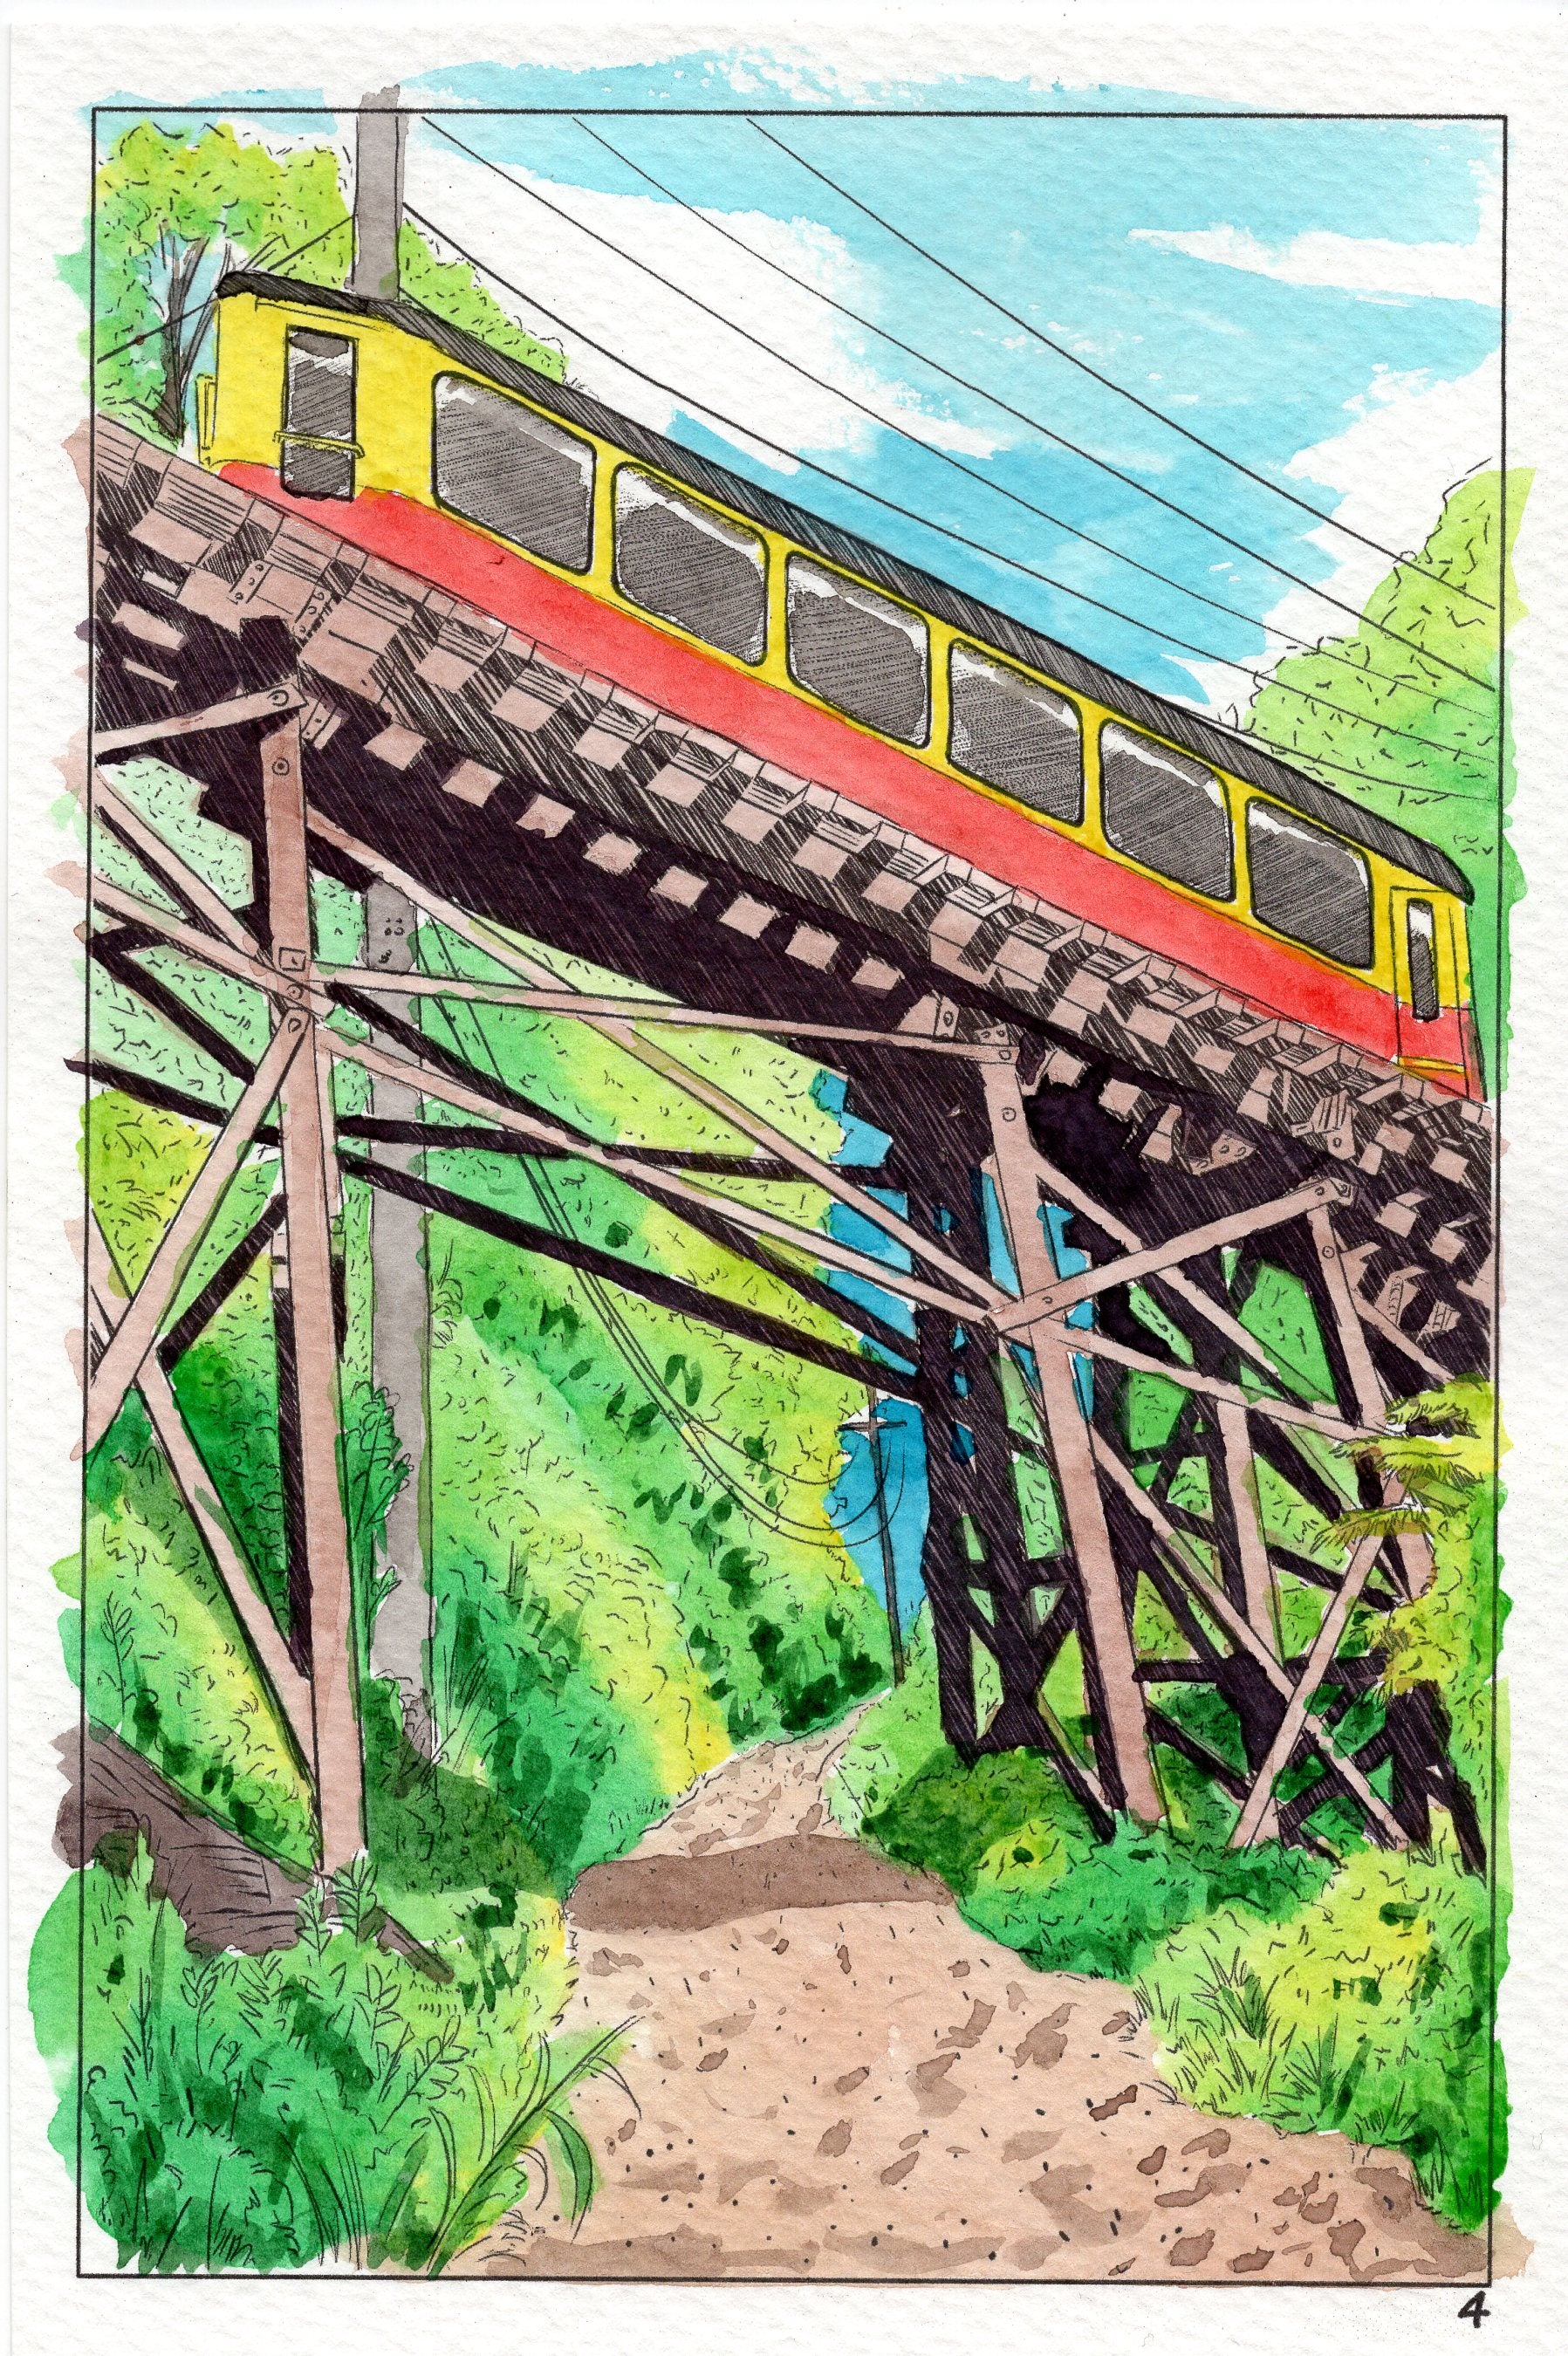 Watercolor painting of the Incline railway on Lookout Mountain in Chattanooga Tennessee